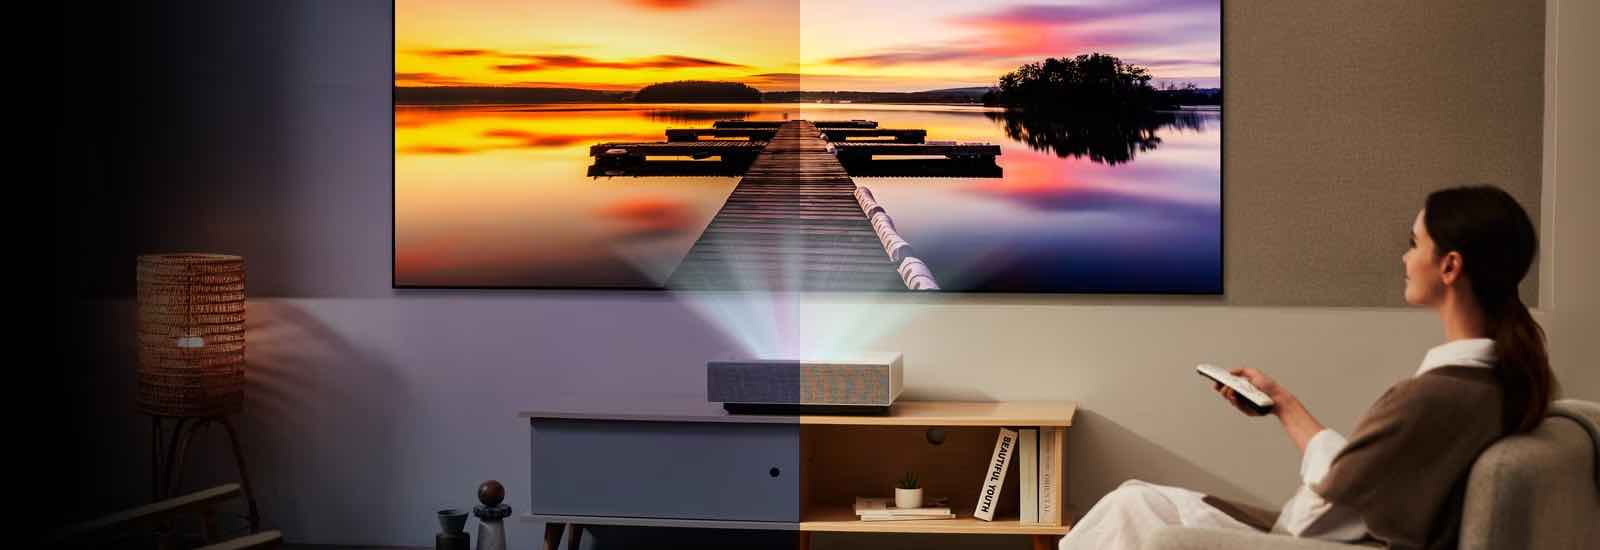 LG projector for small room